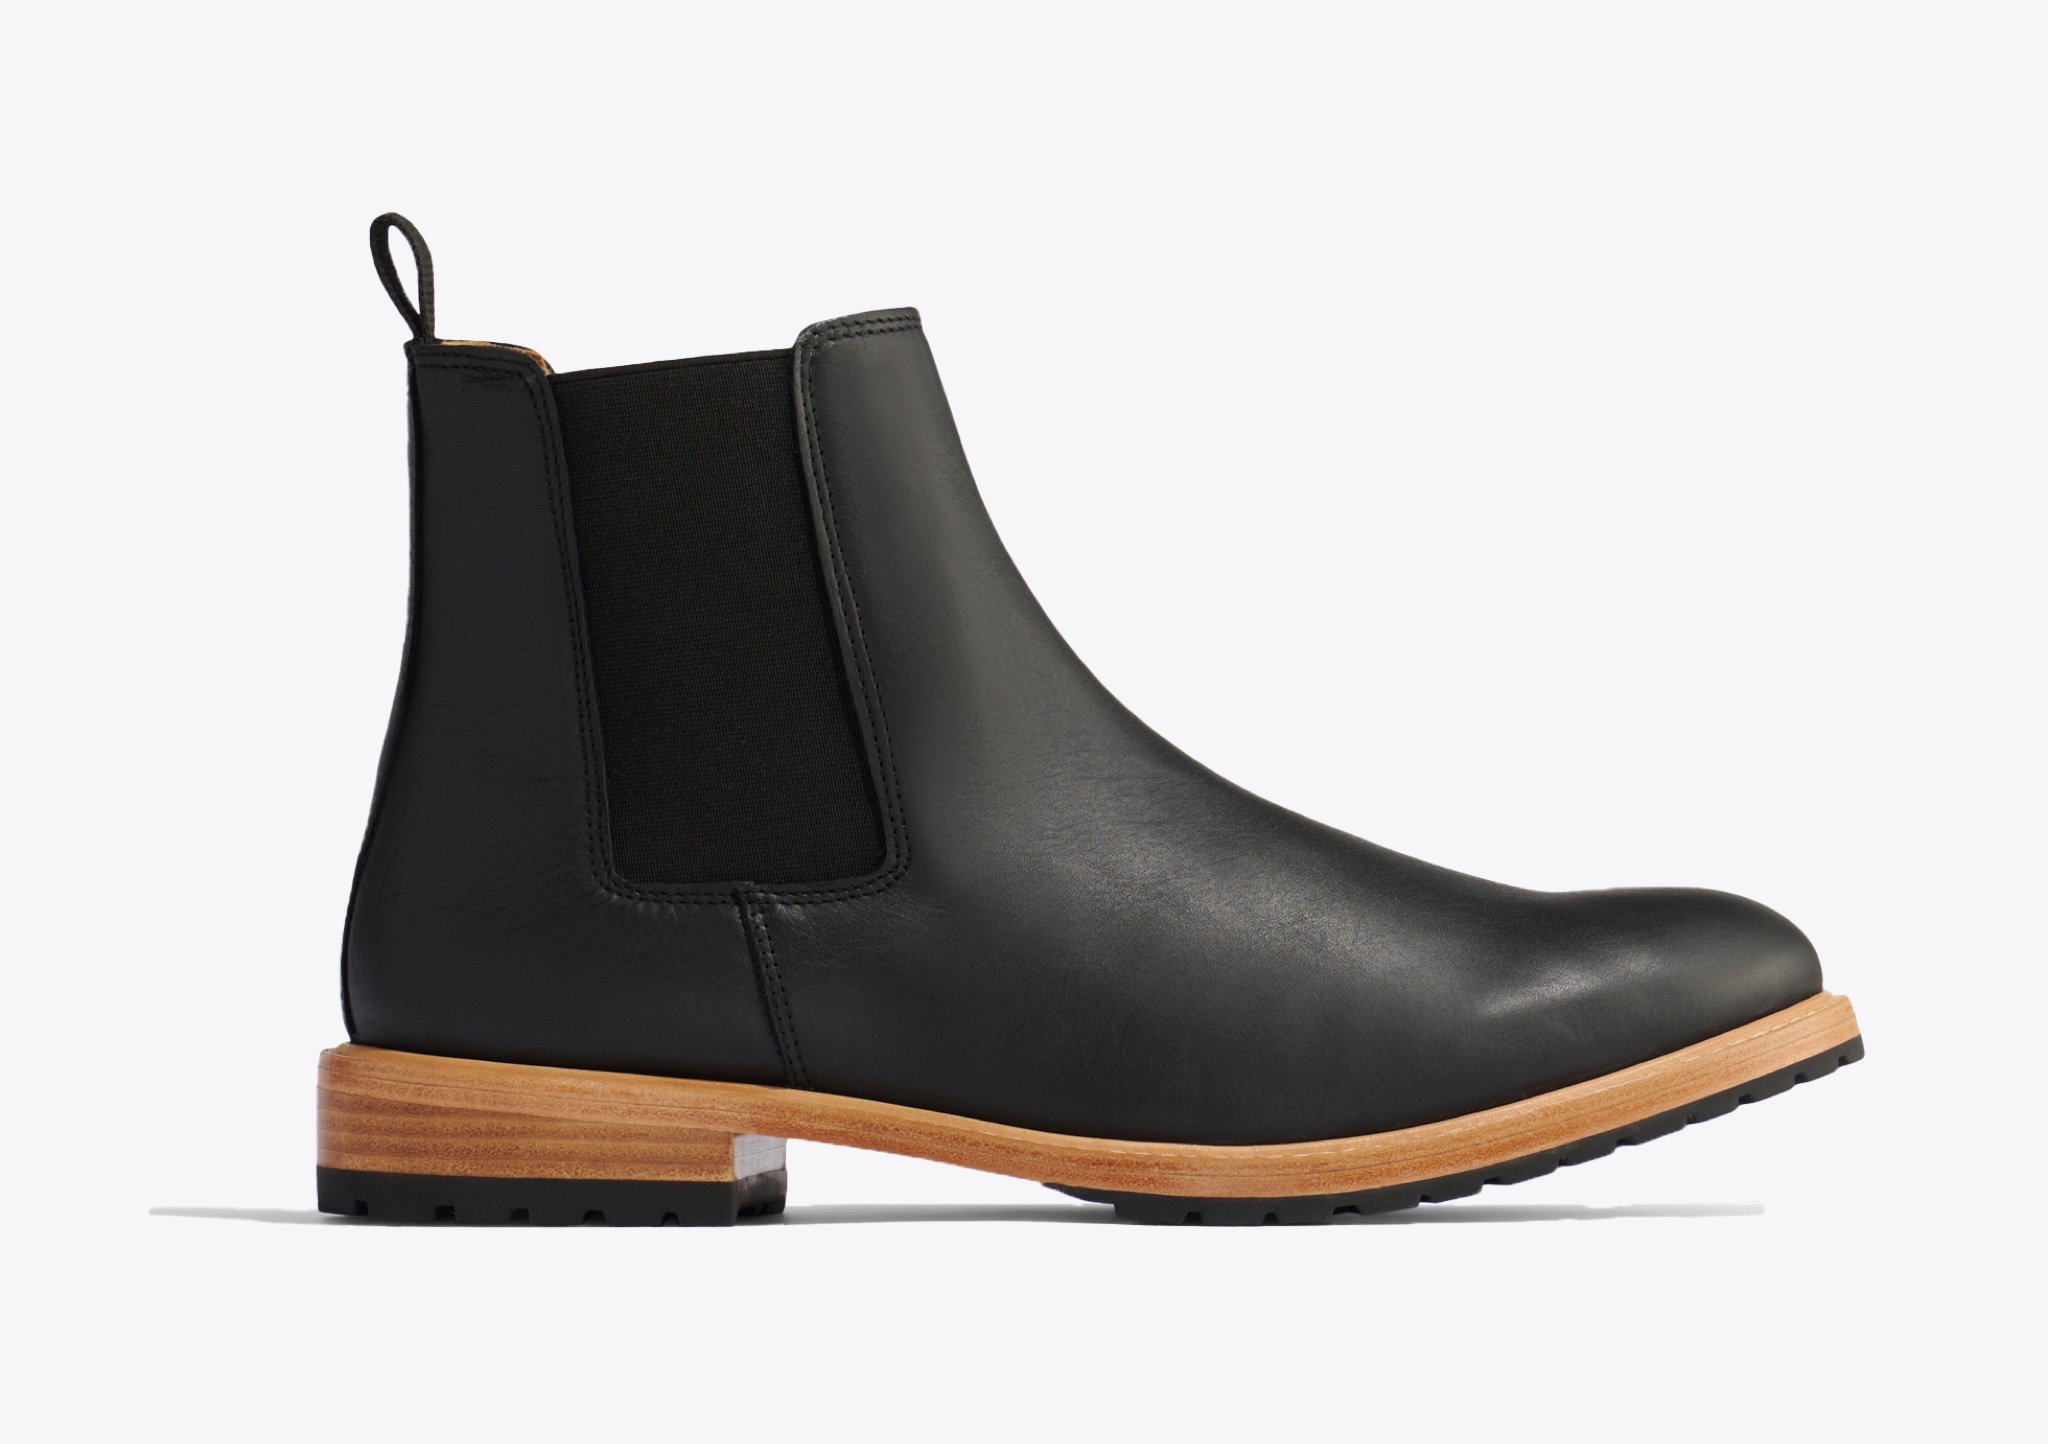 Nisolo Marco Everyday Chelsea Boot Black - Every Nisolo product is built on the foundation of comfort, function, and design. 